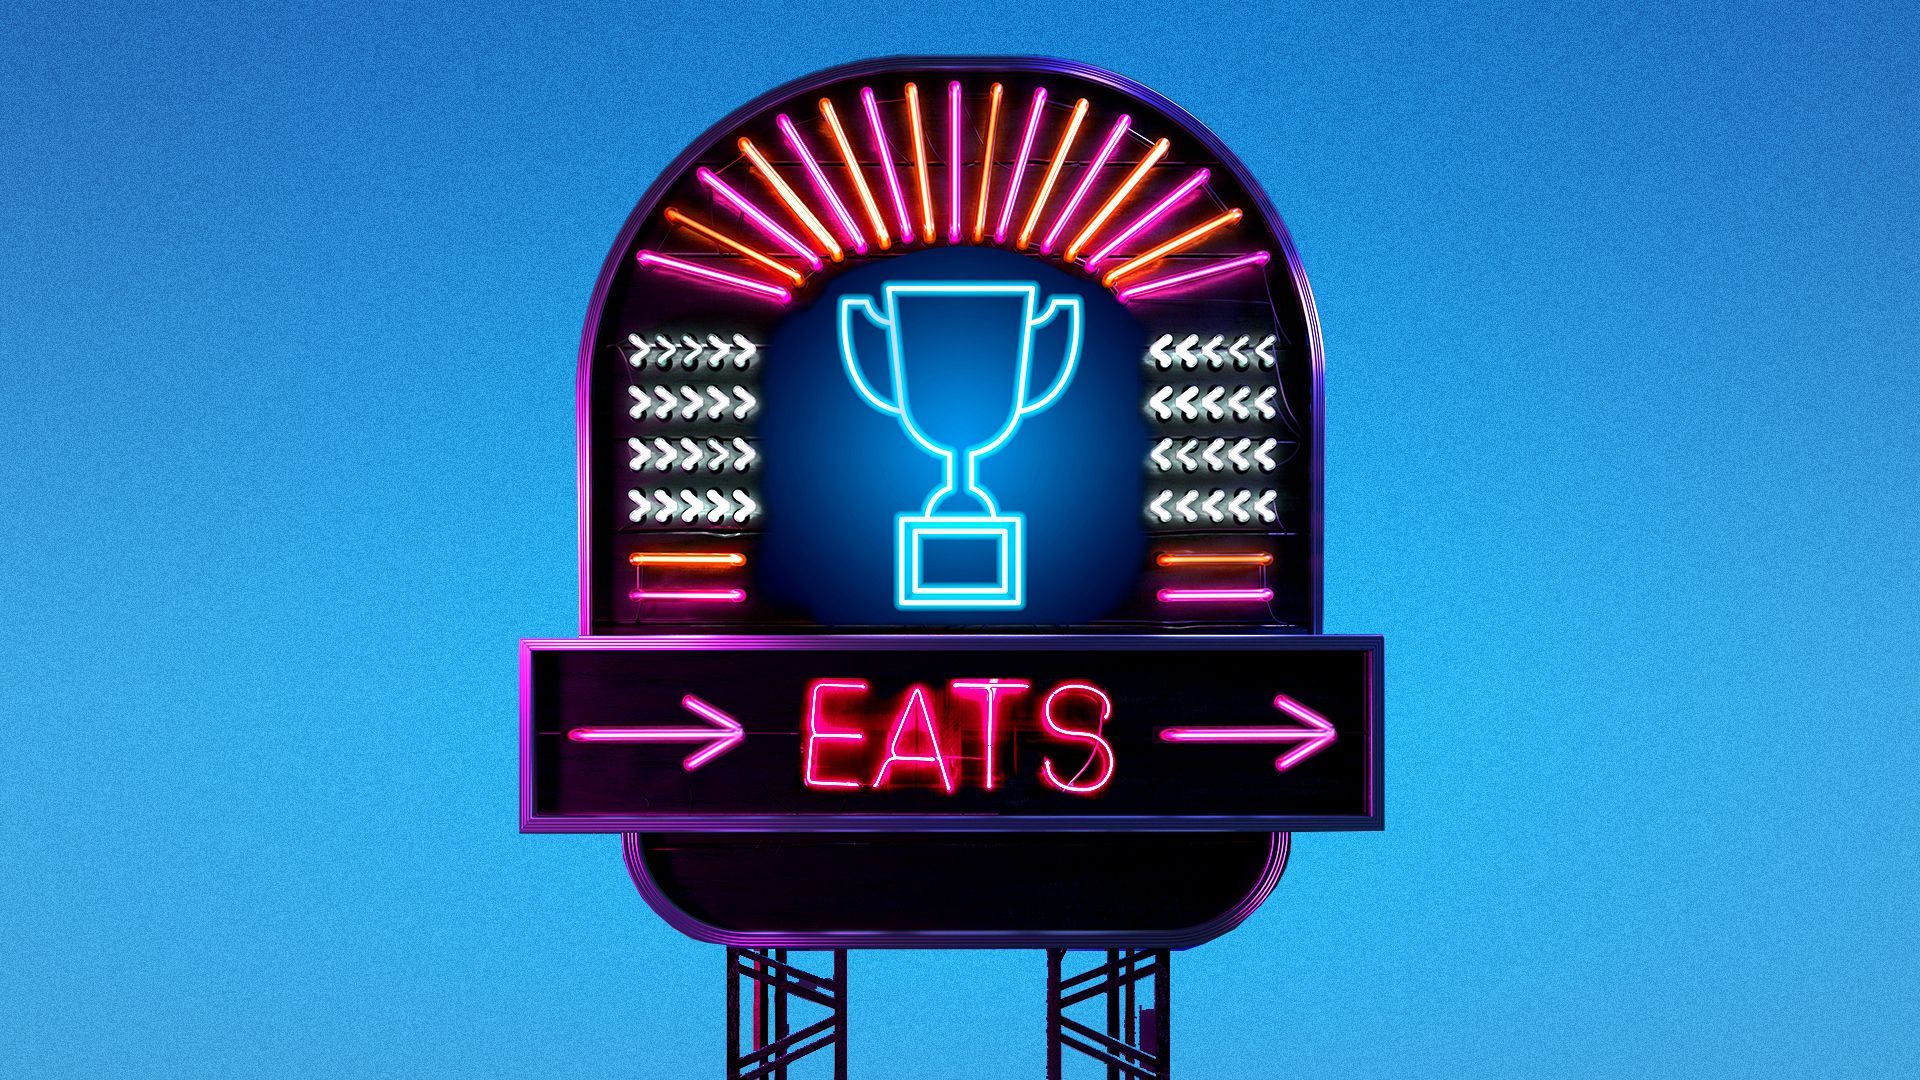 Illustration of a large neon restaurant sign showing a trophy symbol and the word "EATS"